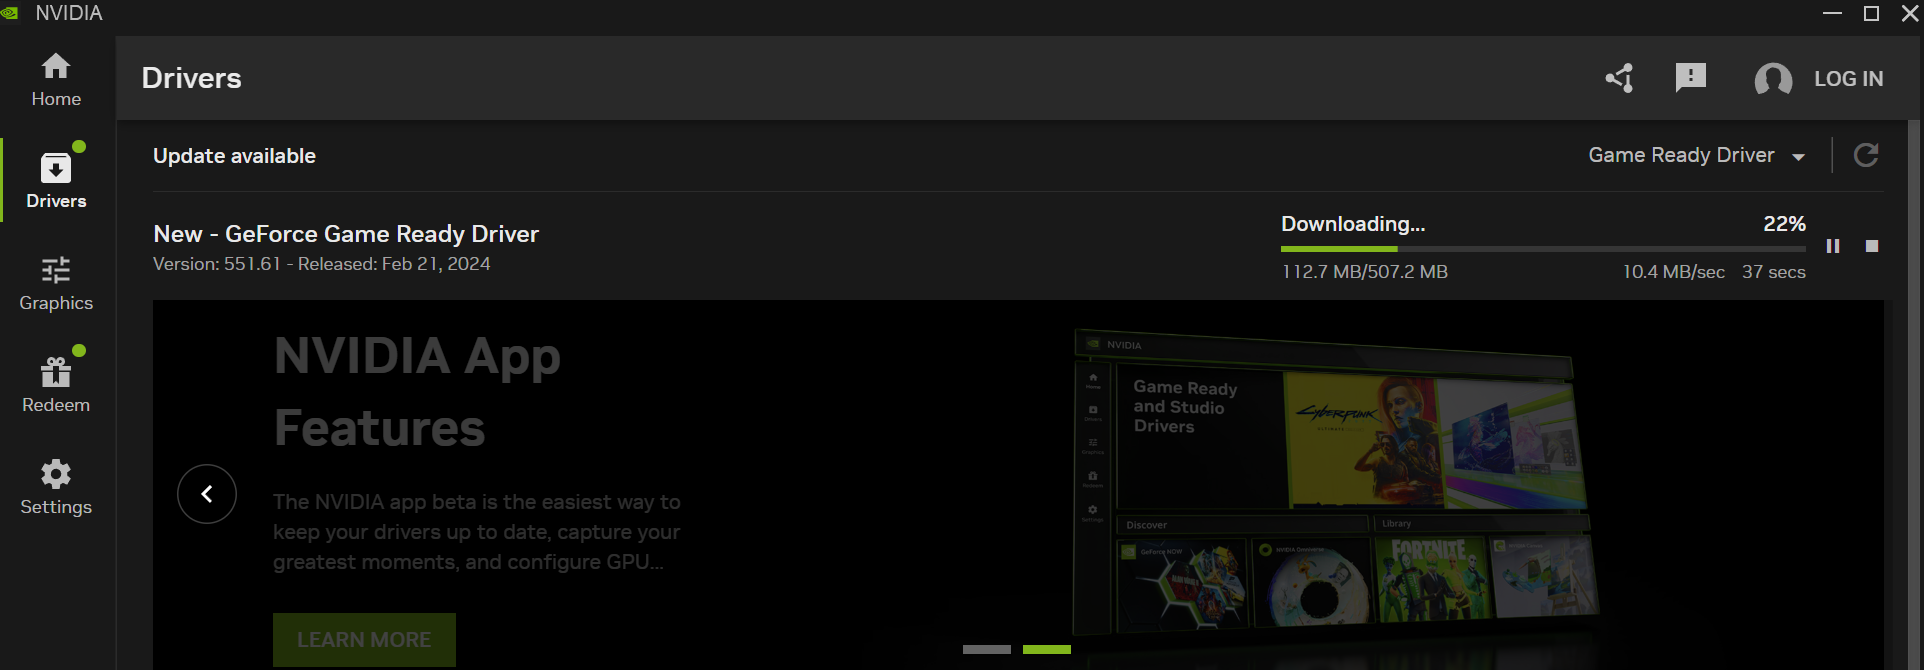 Proof that you can, miracle of miracles, download an Nvidia driver update in Nvidia's new app without having to sign in.